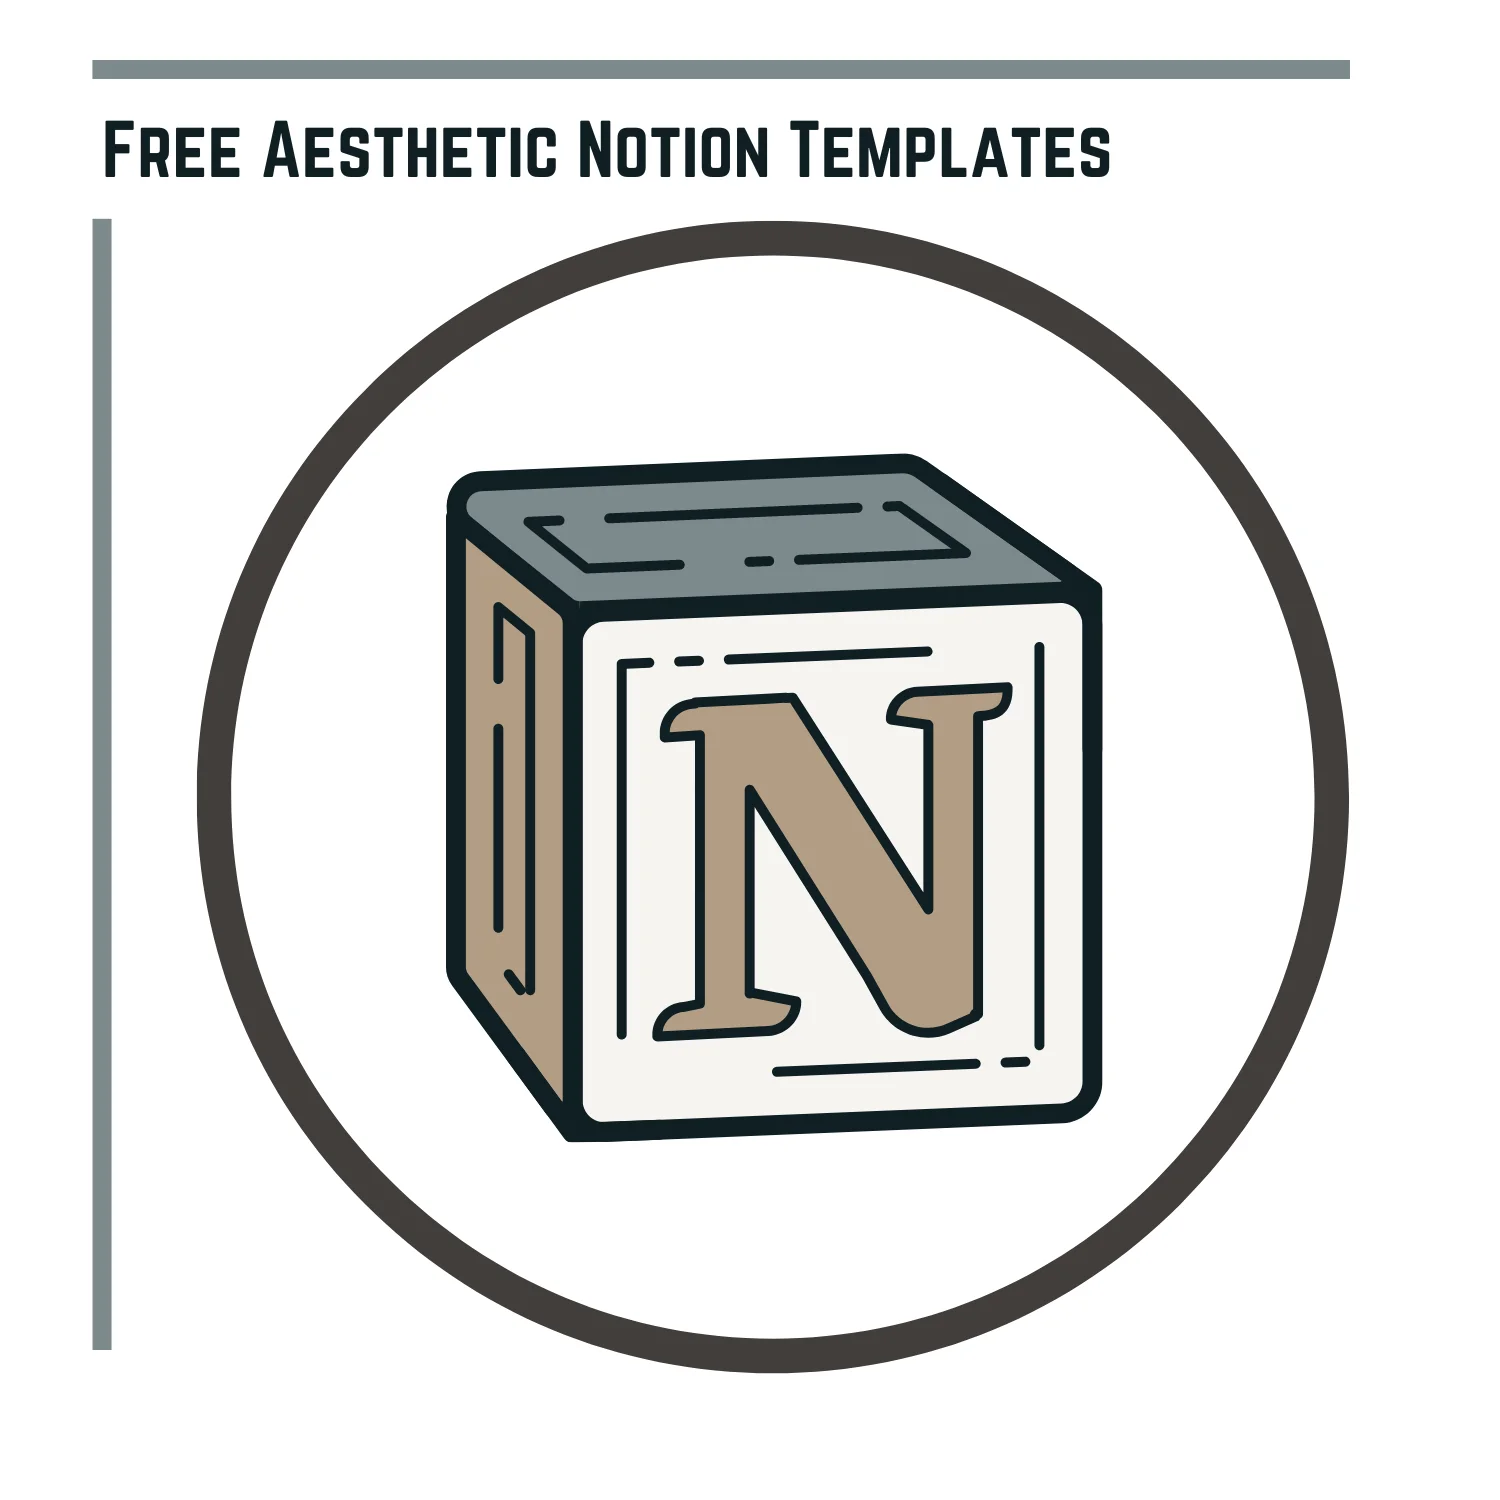 14 Best and Free Aesthetic Notion Templates